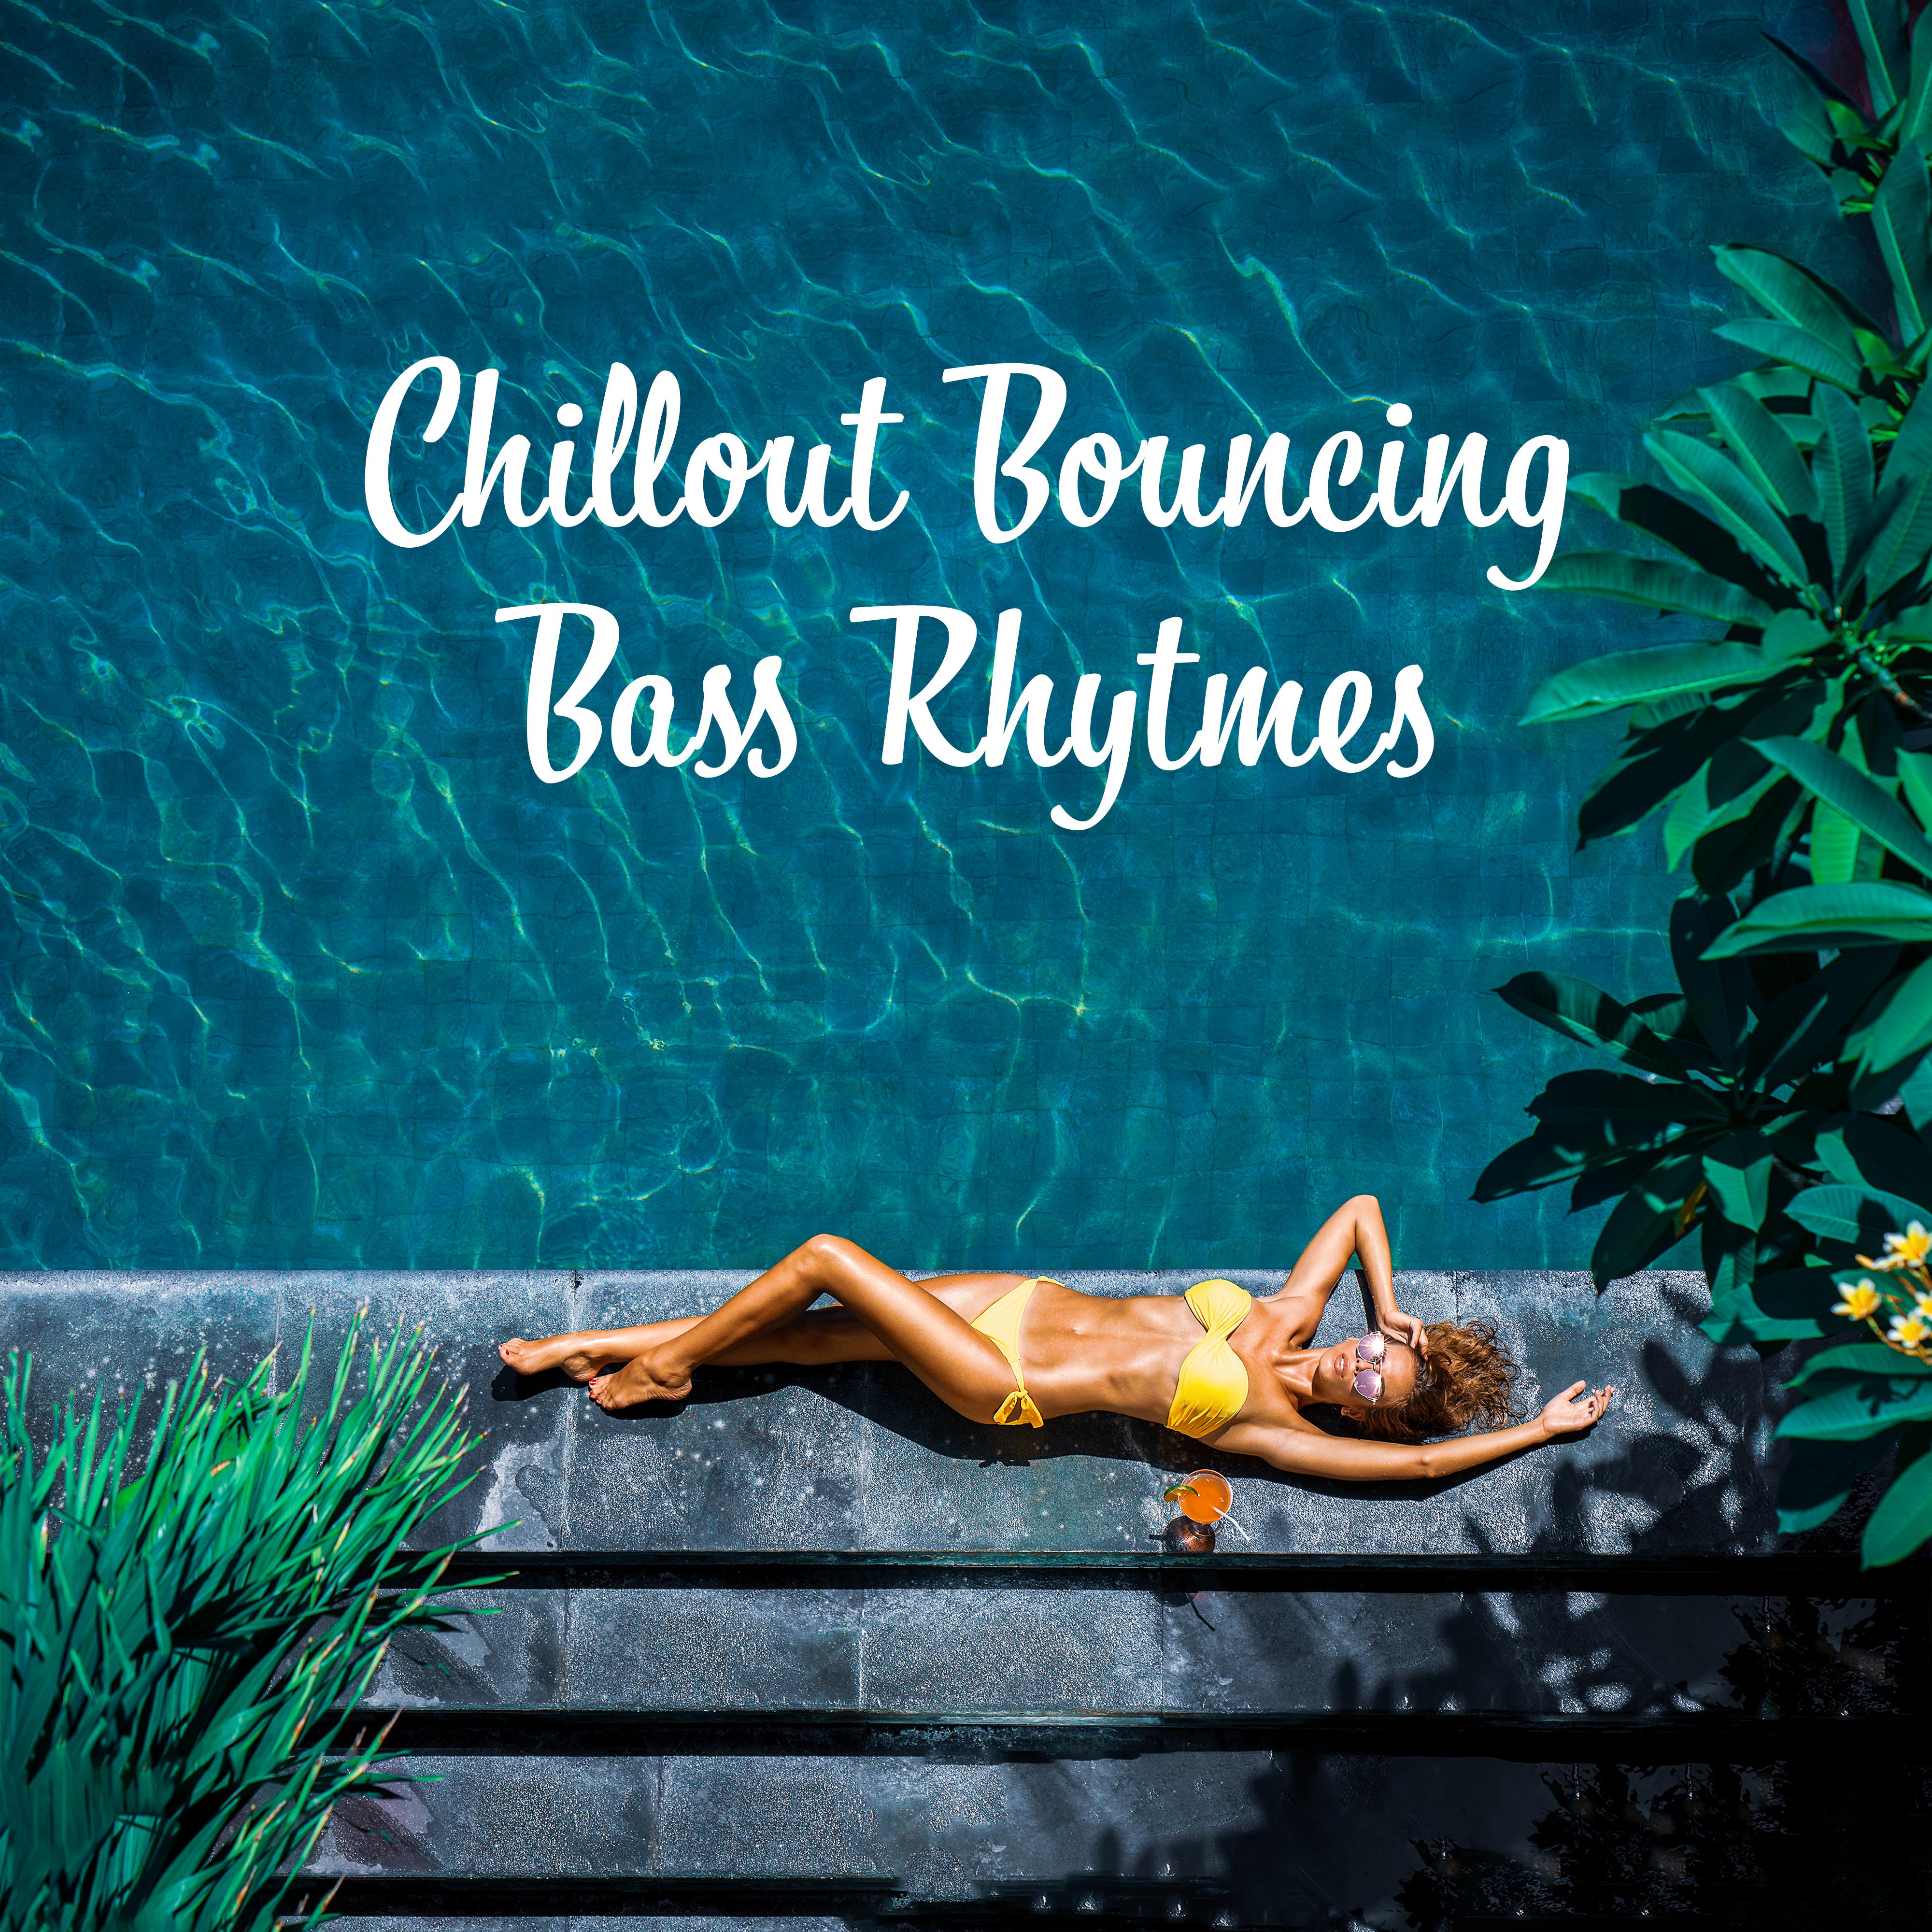 Chillout Bouncing Bass Rhytmes